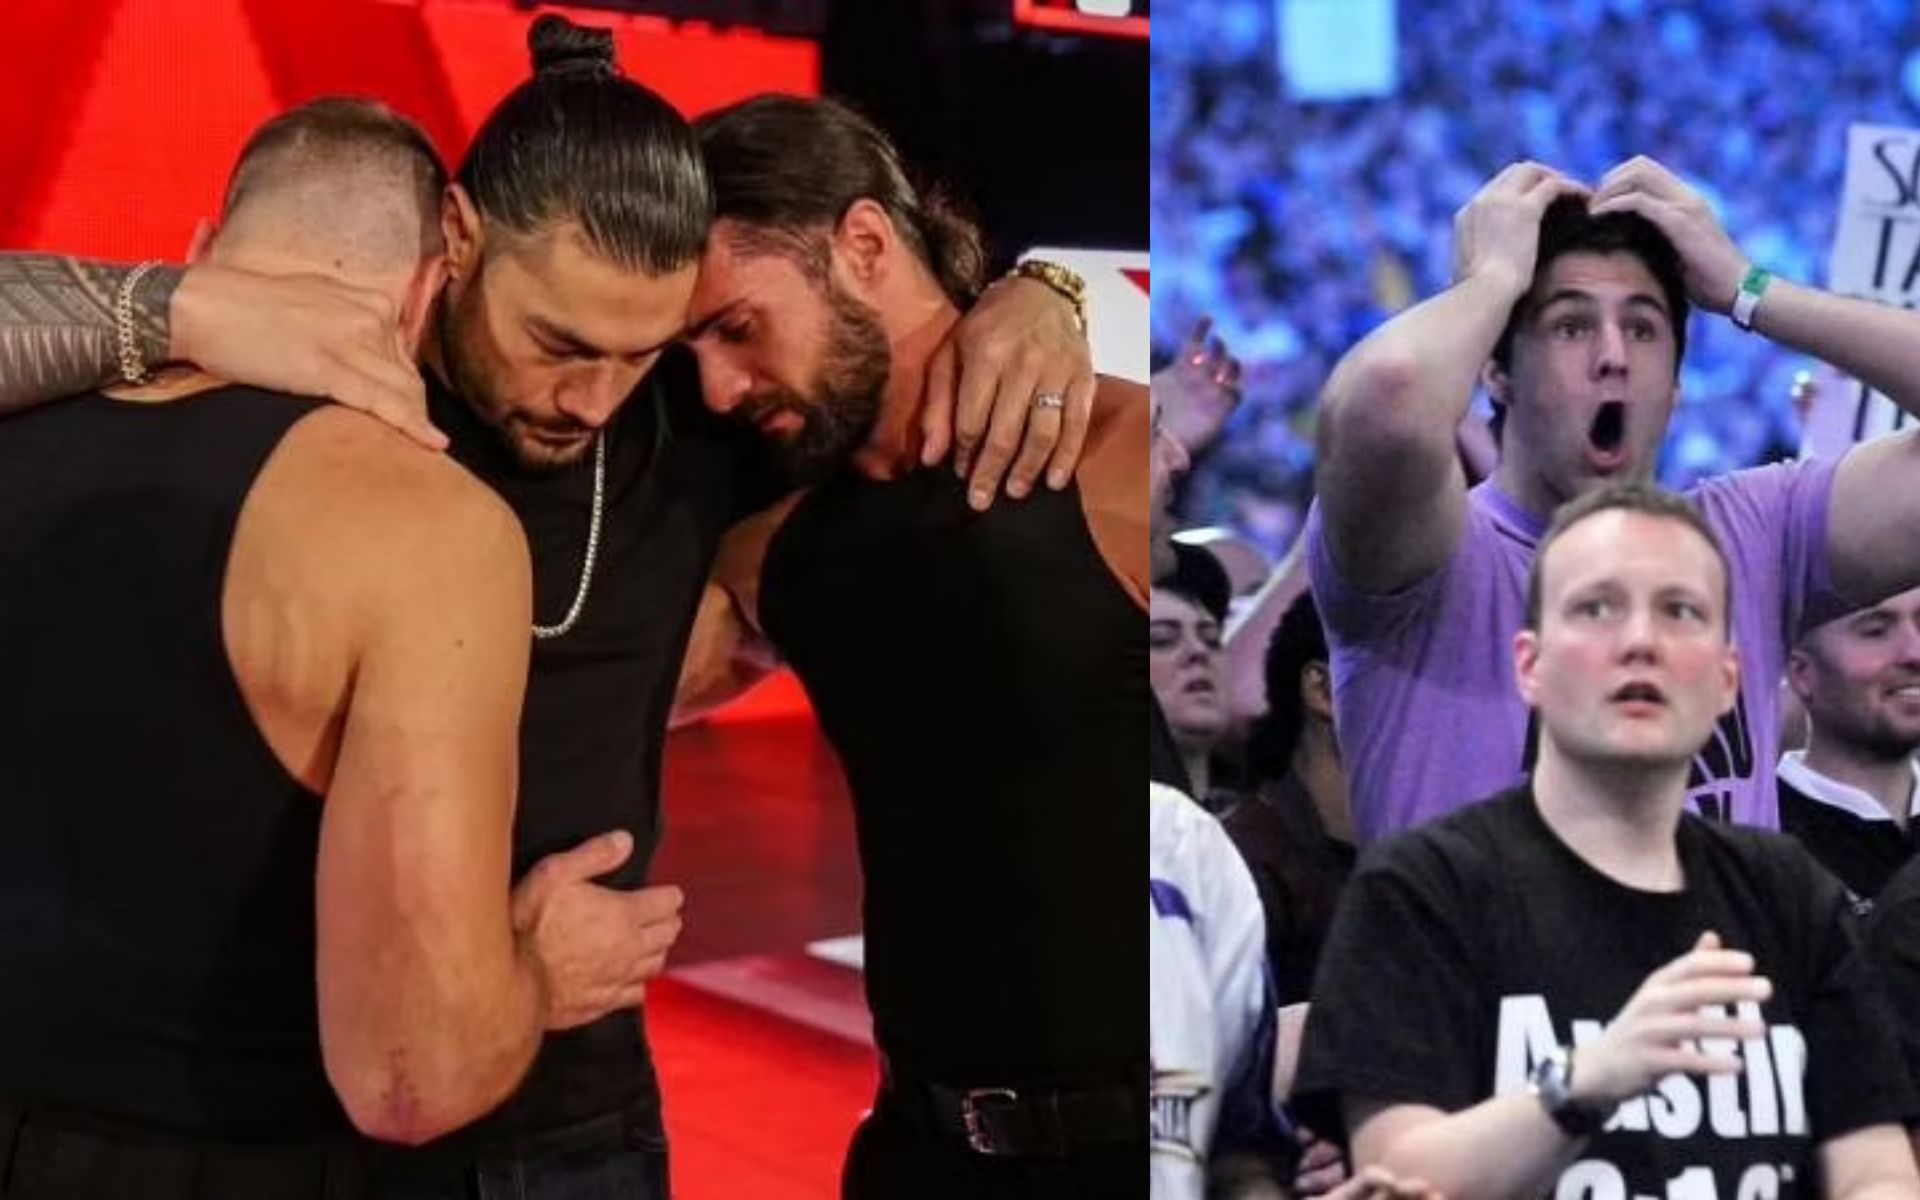 The Shield was uniquely brought up during a recent WWE RAW episode by a fan in the audience